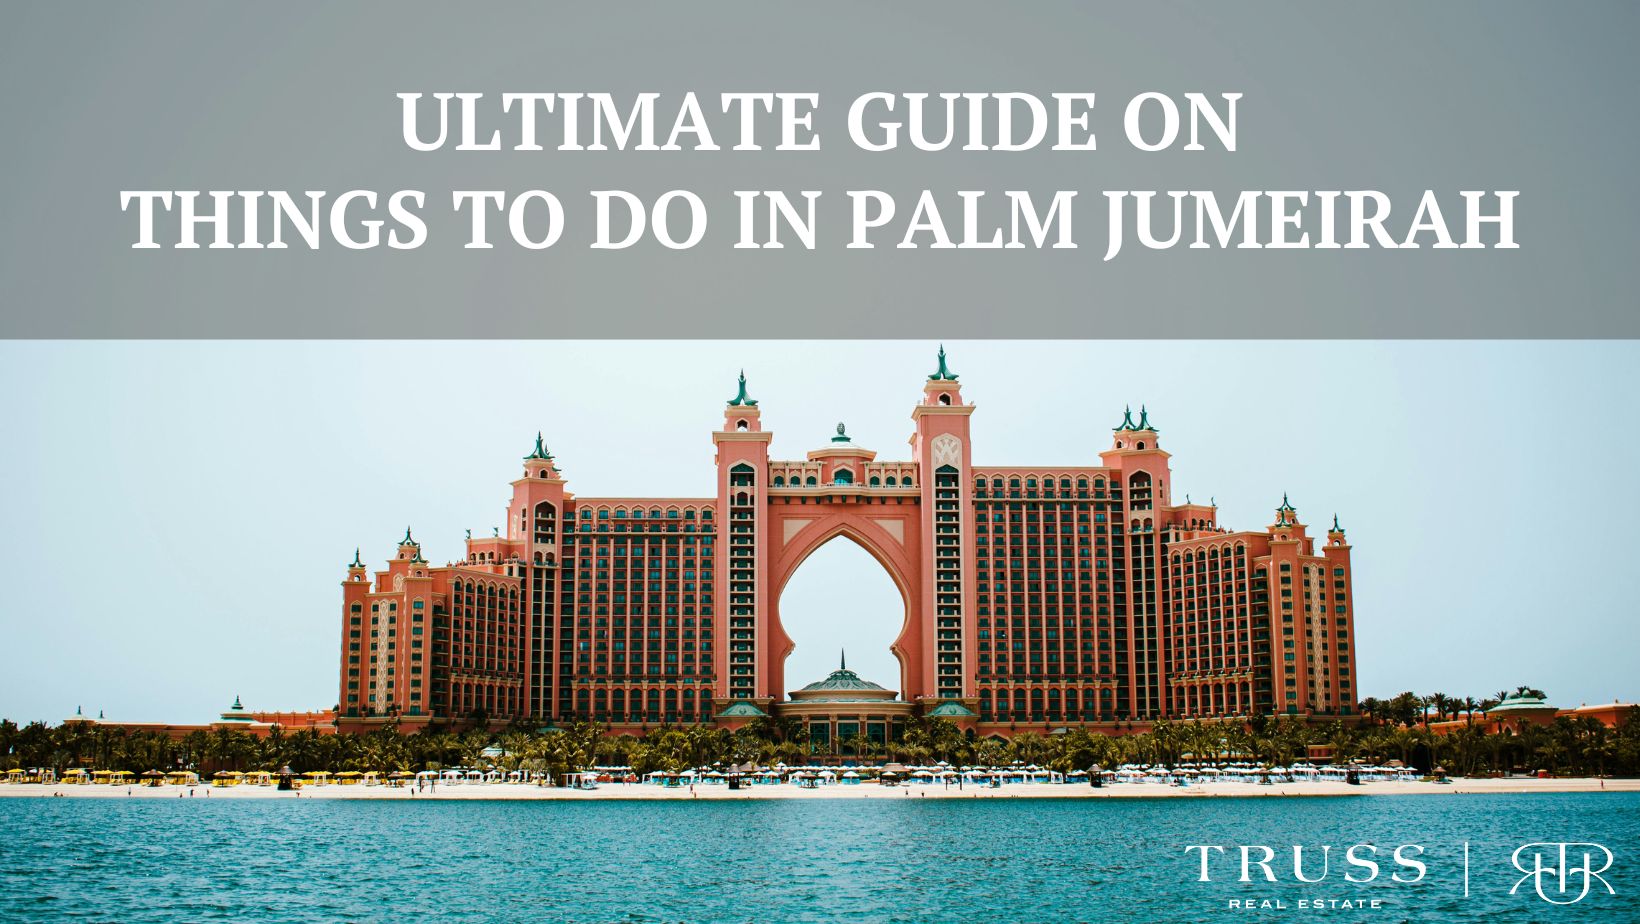 Guide on Things to do in Palm Jumeirah